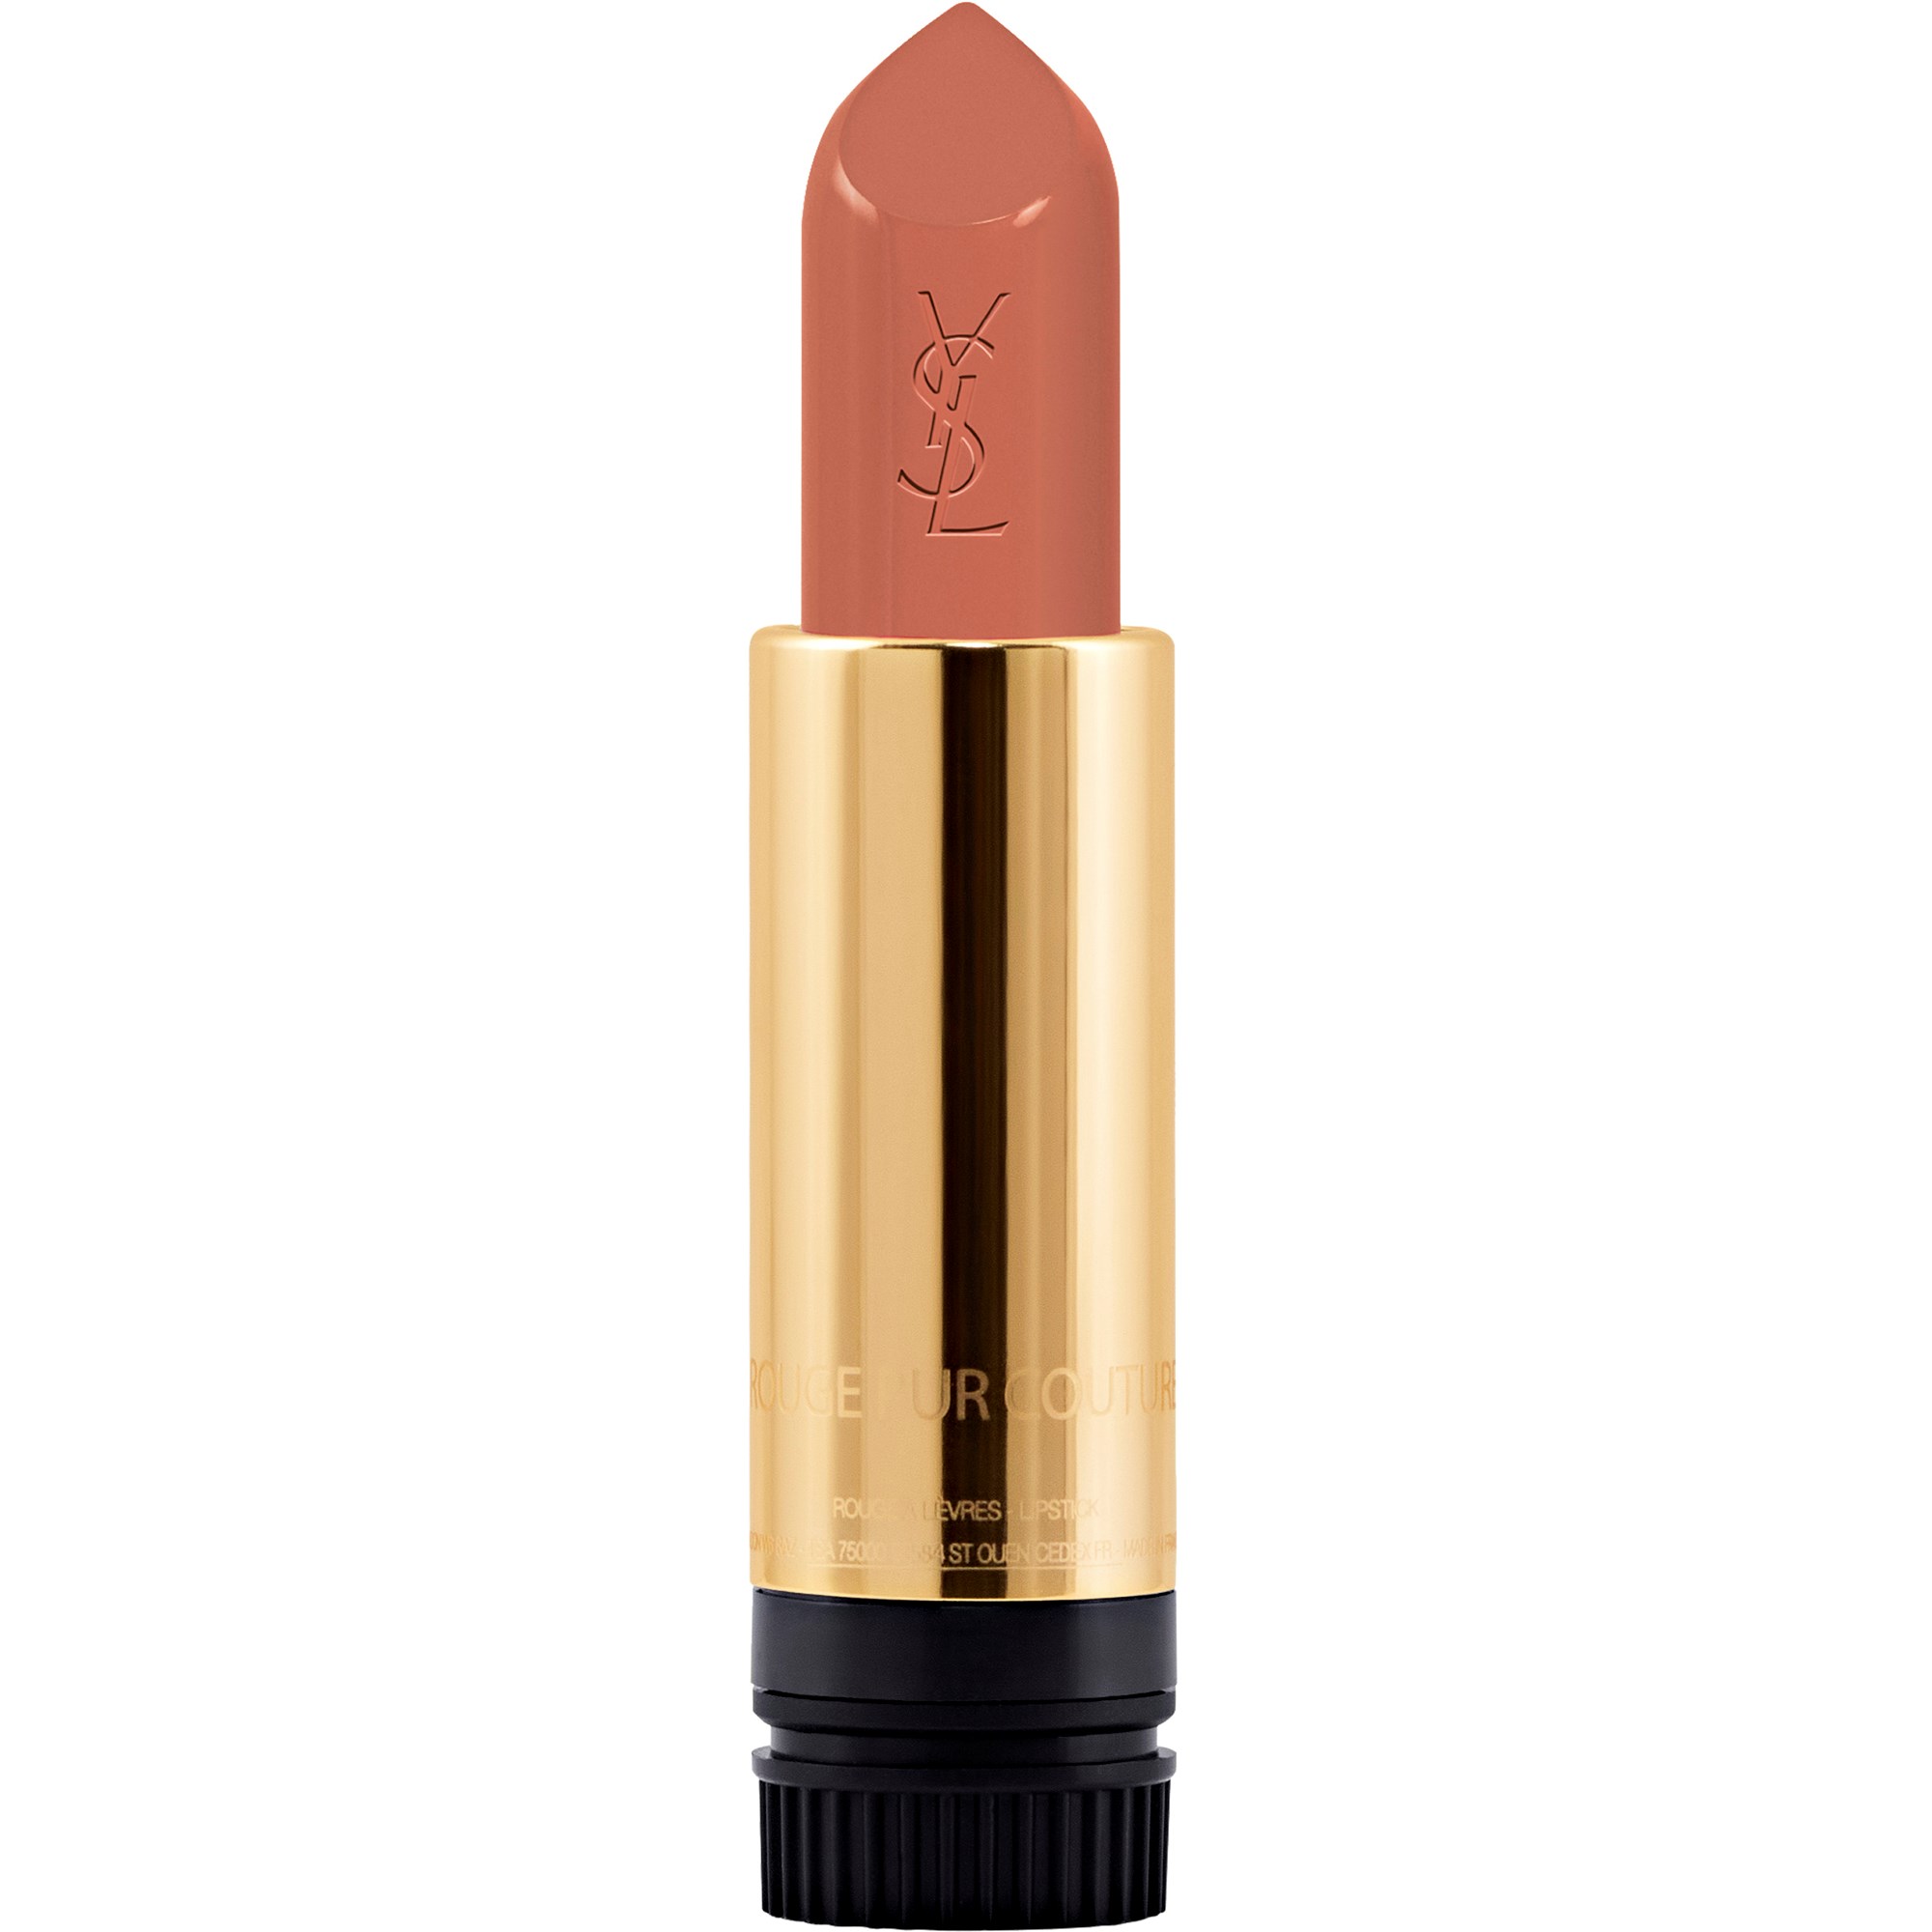 Läs mer om Yves Saint Laurent Rouge Pur Couture Lipstick Refill Nu Muse